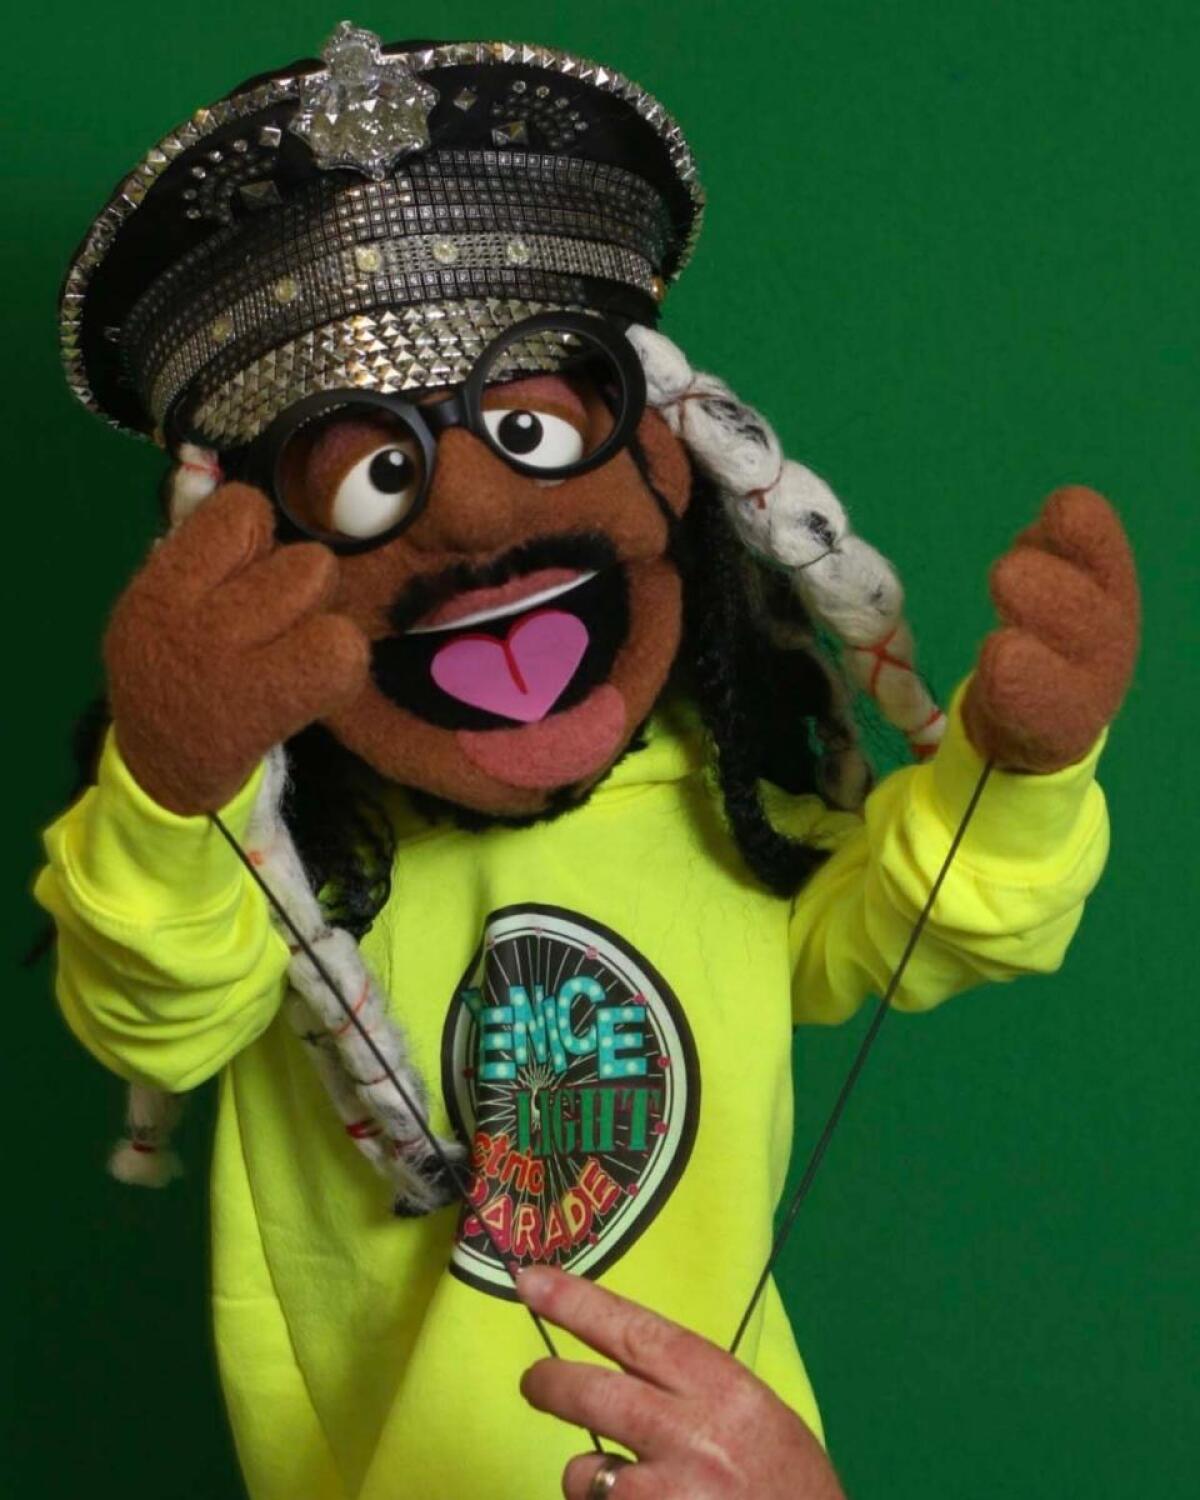 Marcus Gladney commissioned a Muppet-style puppet of himself to help promote the electric light parade on social media.